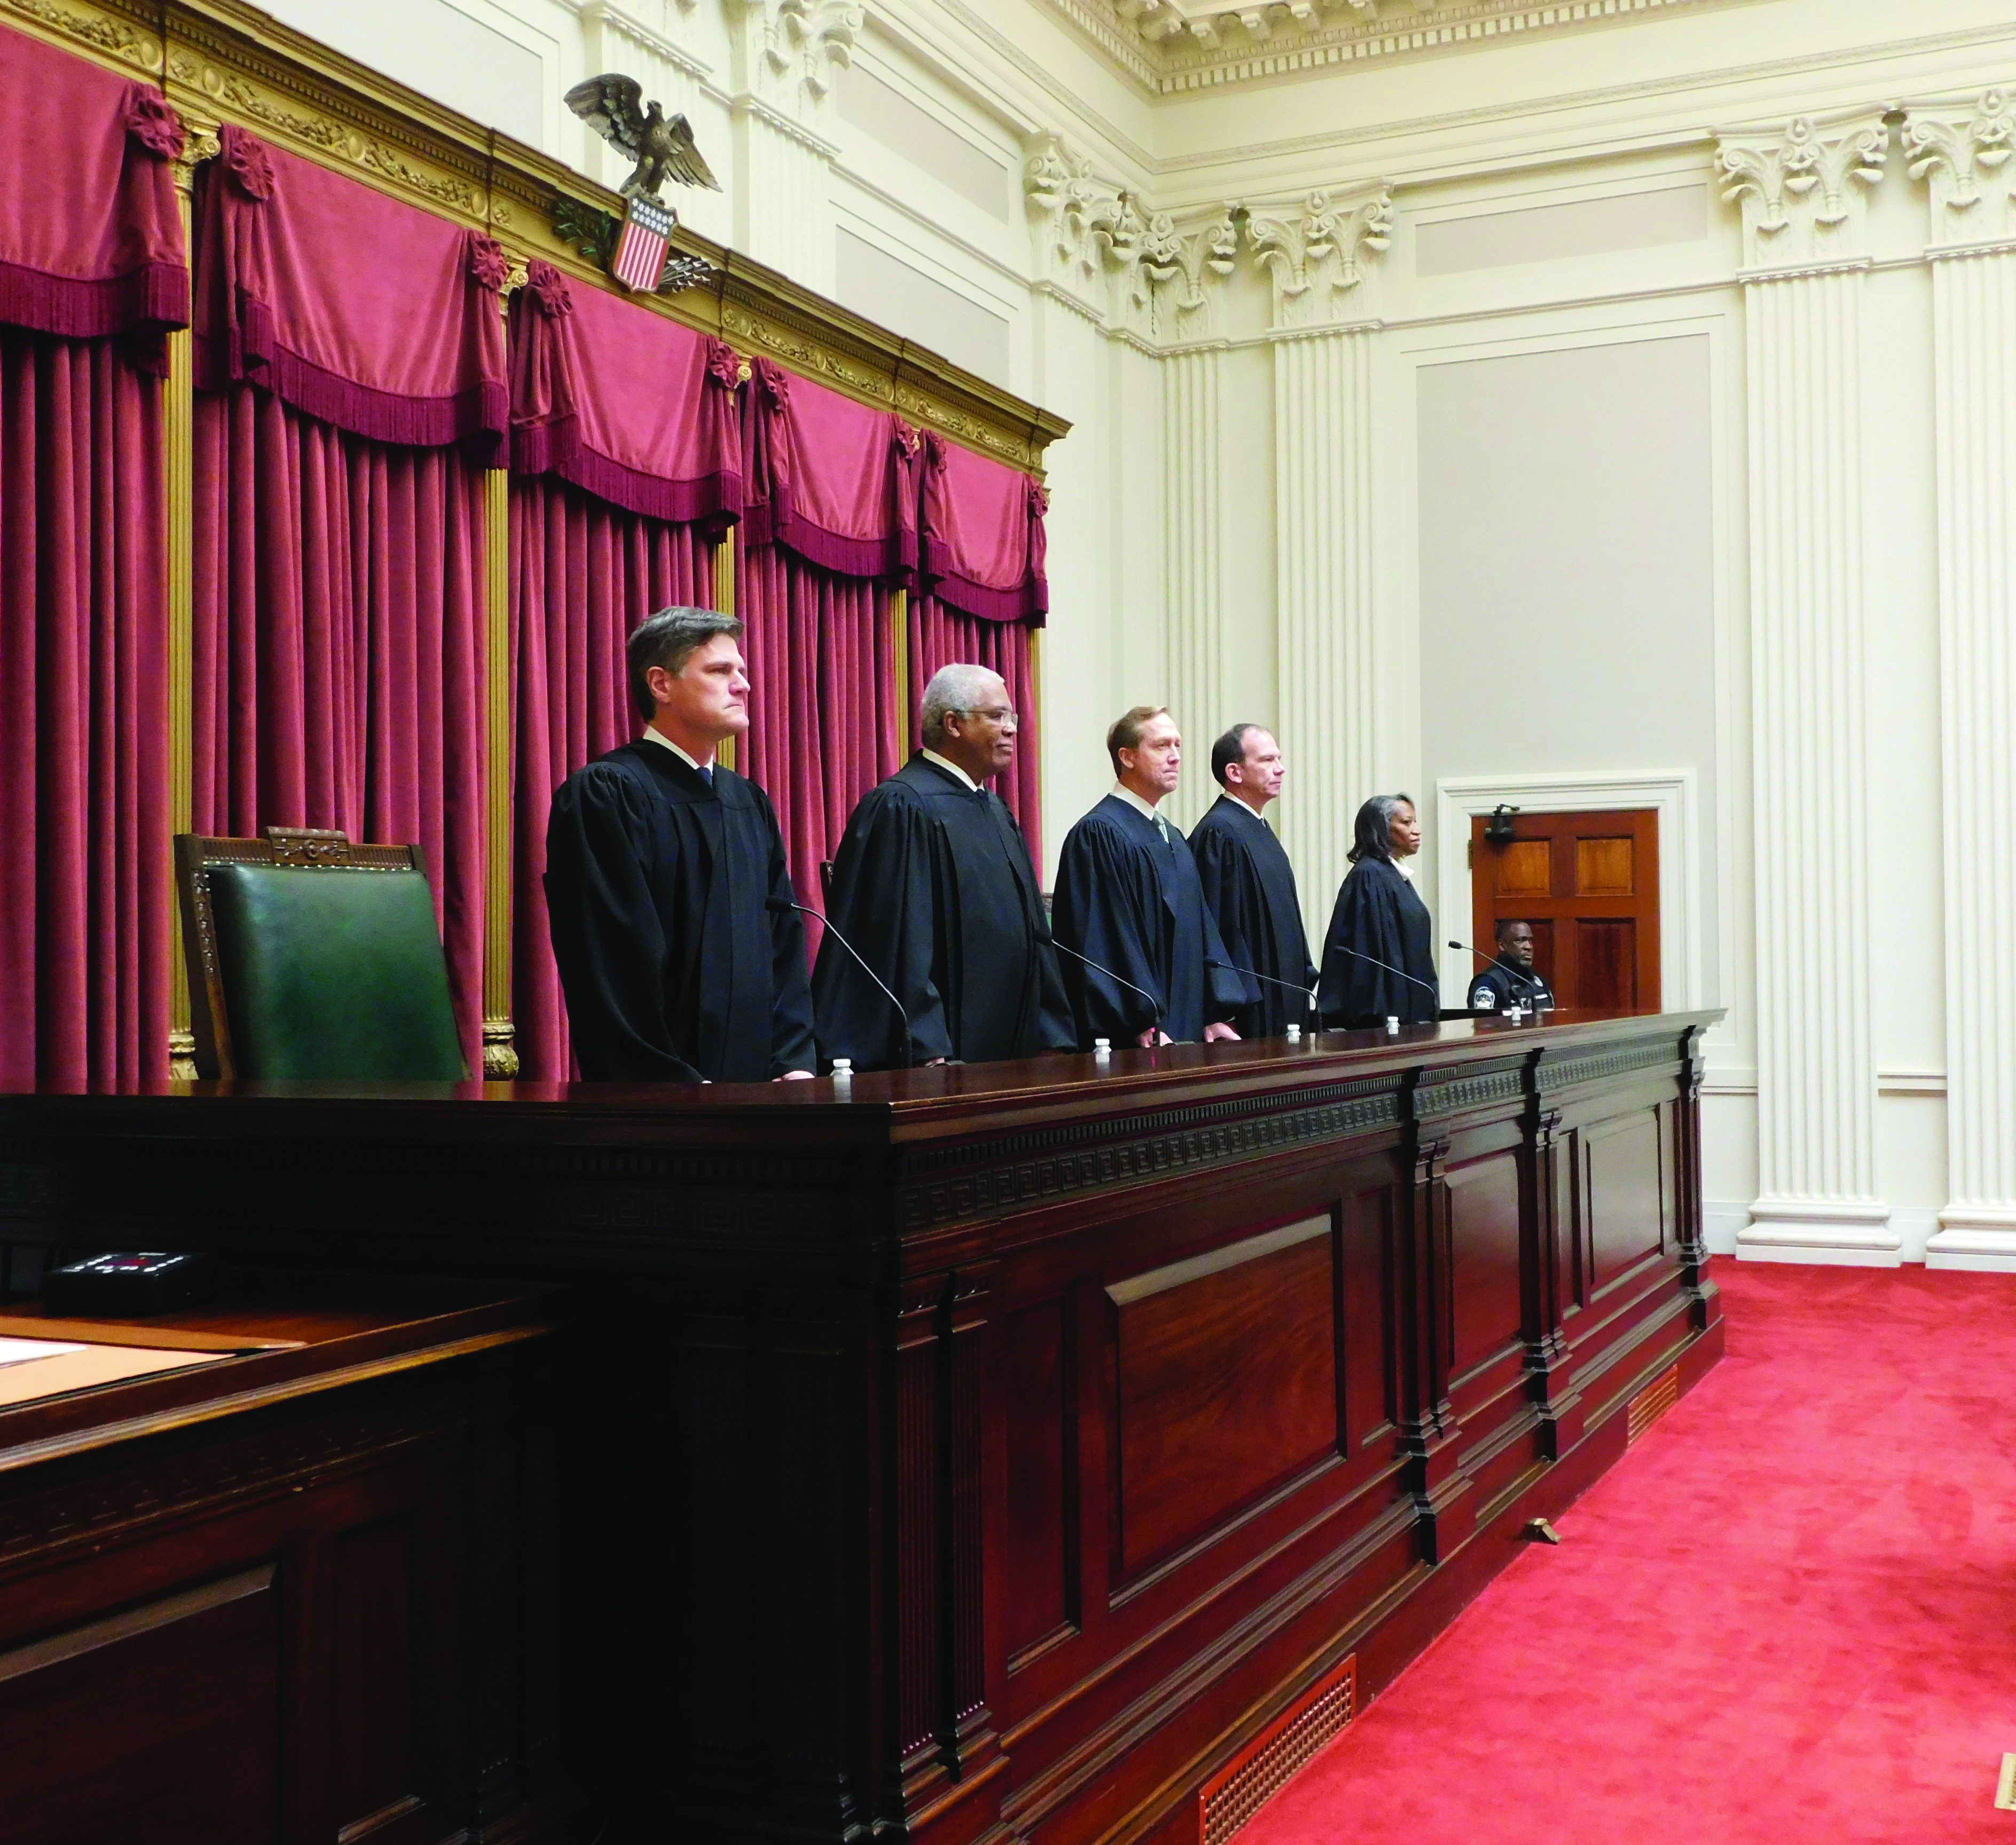 The judges of the U.S. Court of Appeals for the Armed Forces prepare to take the bench for the admissions ceremony of the 72d Graduate Course. From left to right: Judge Liam P. Hardy, Judge John E. Sparks, Chief Judge Kevin A. Ohlson, Judge Gregory E. Maggs, Judge M. Tia Johnson. (Credit: Lanell A. Best) 